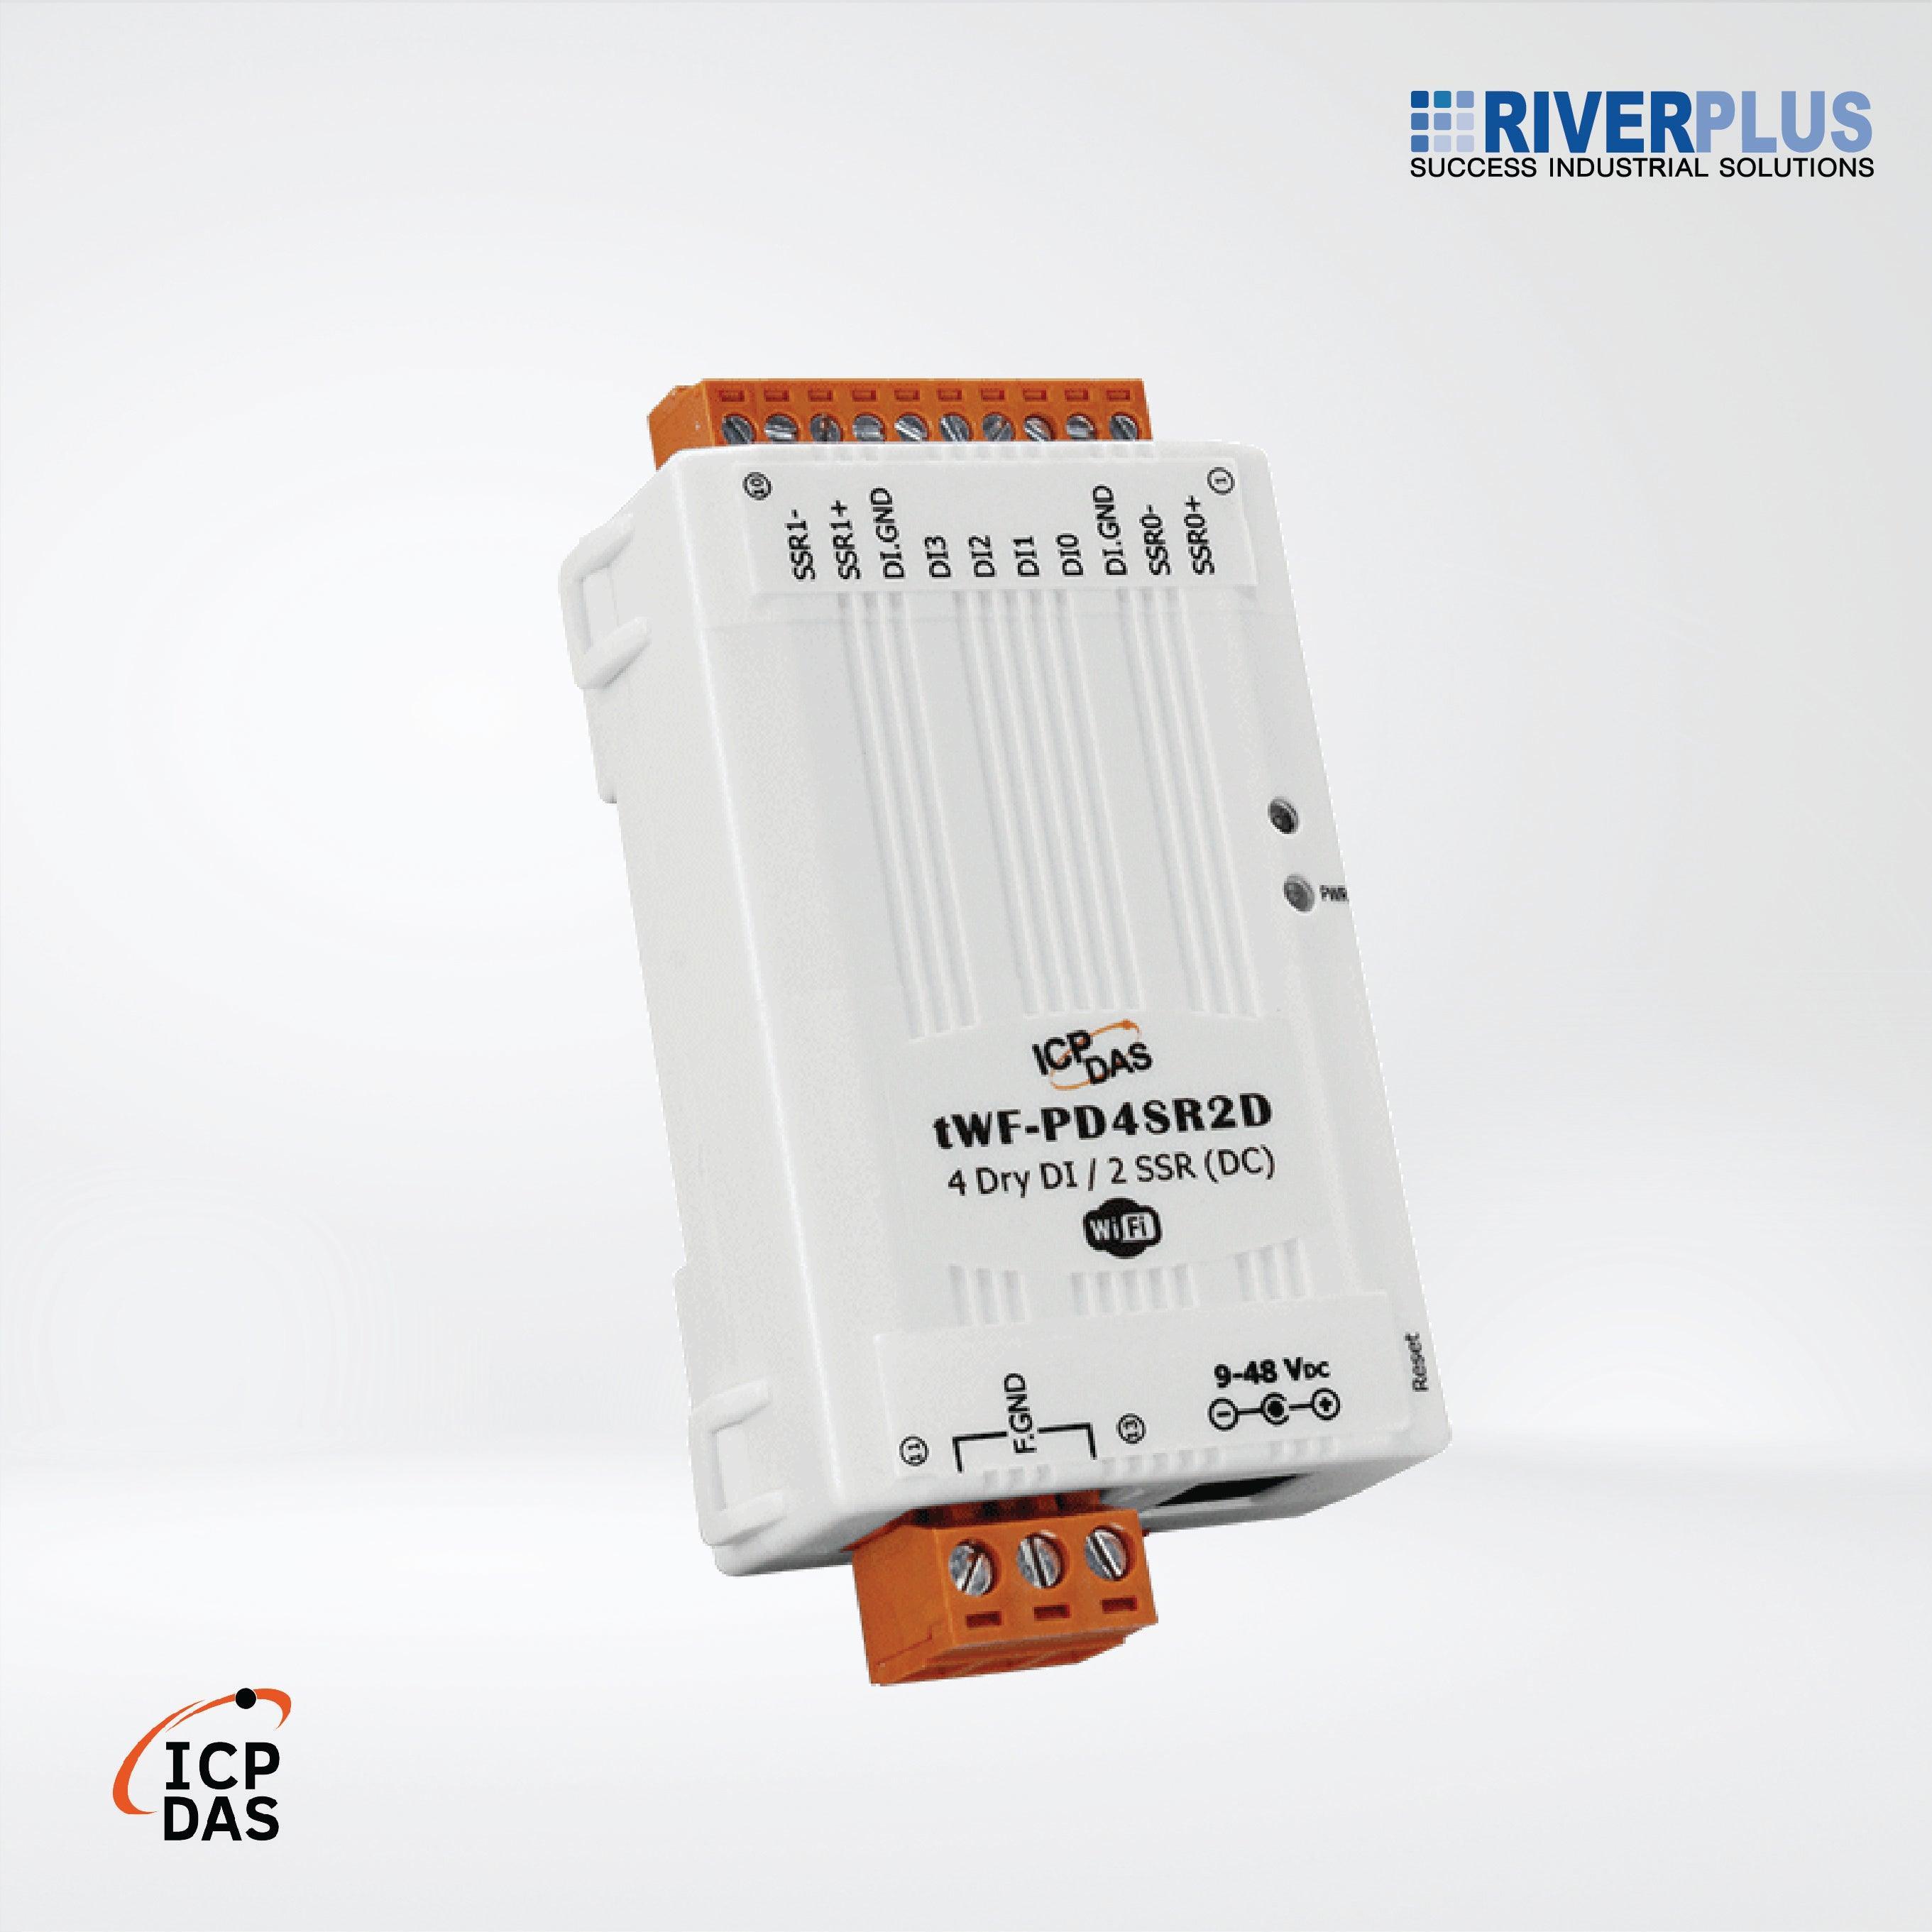 tWF-PD4SR2D Tiny Wi-Fi I/O Module with Isolated 4-ch (Dry) DI and 2-ch DC SSR (Asia Only) - Riverplus